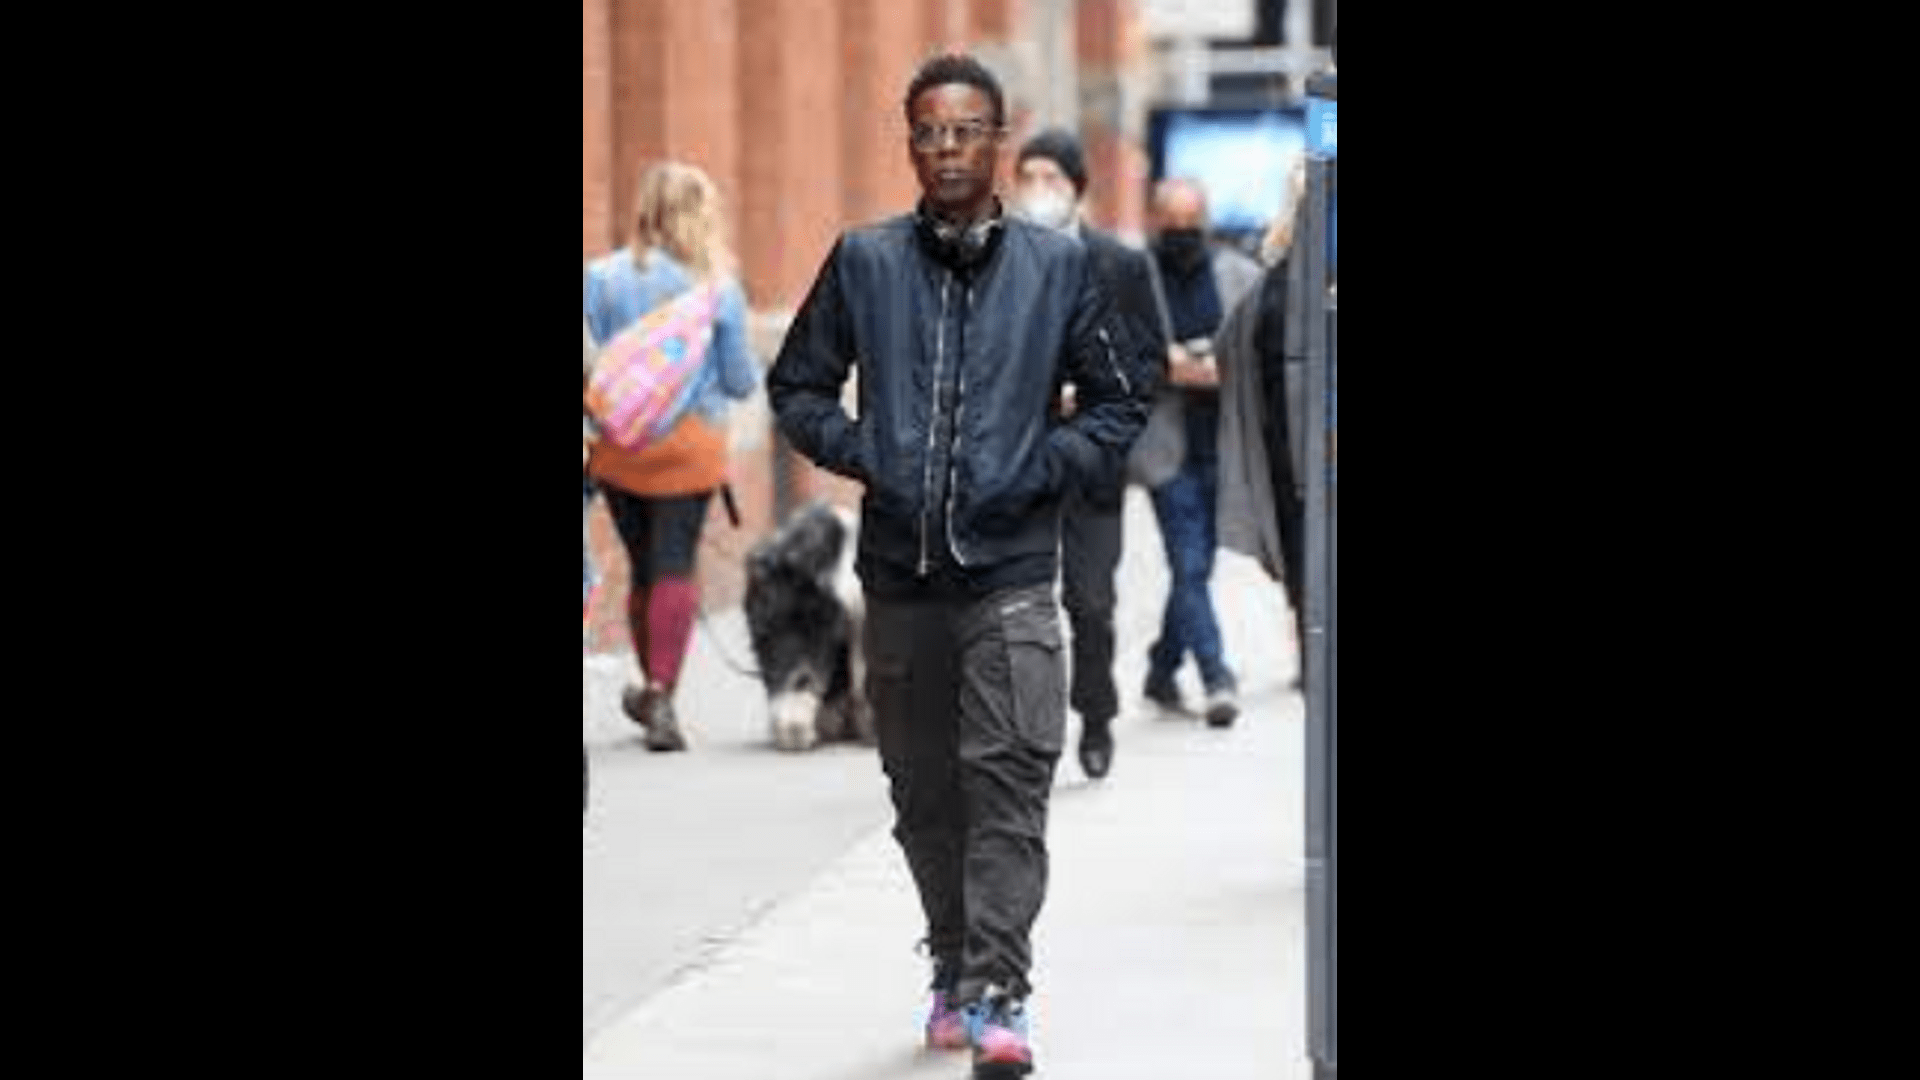 Chris Rock looks serious in New York in a rare photo after the Oscar slap